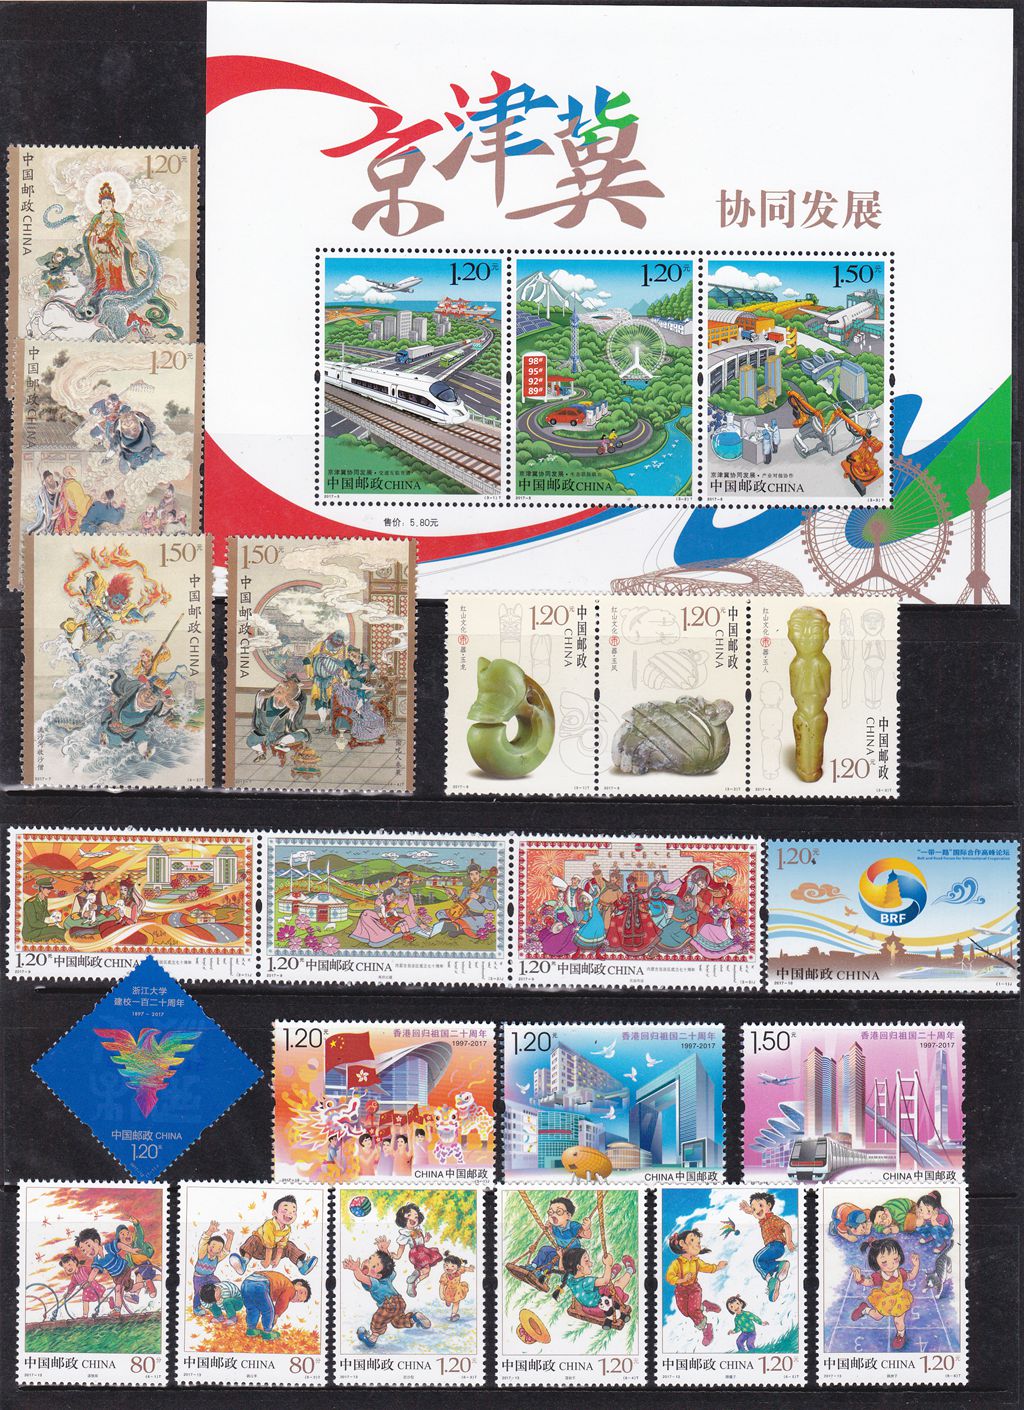 M2131, Complete 2017 China Stamp, SS and Booklet, With Official Album